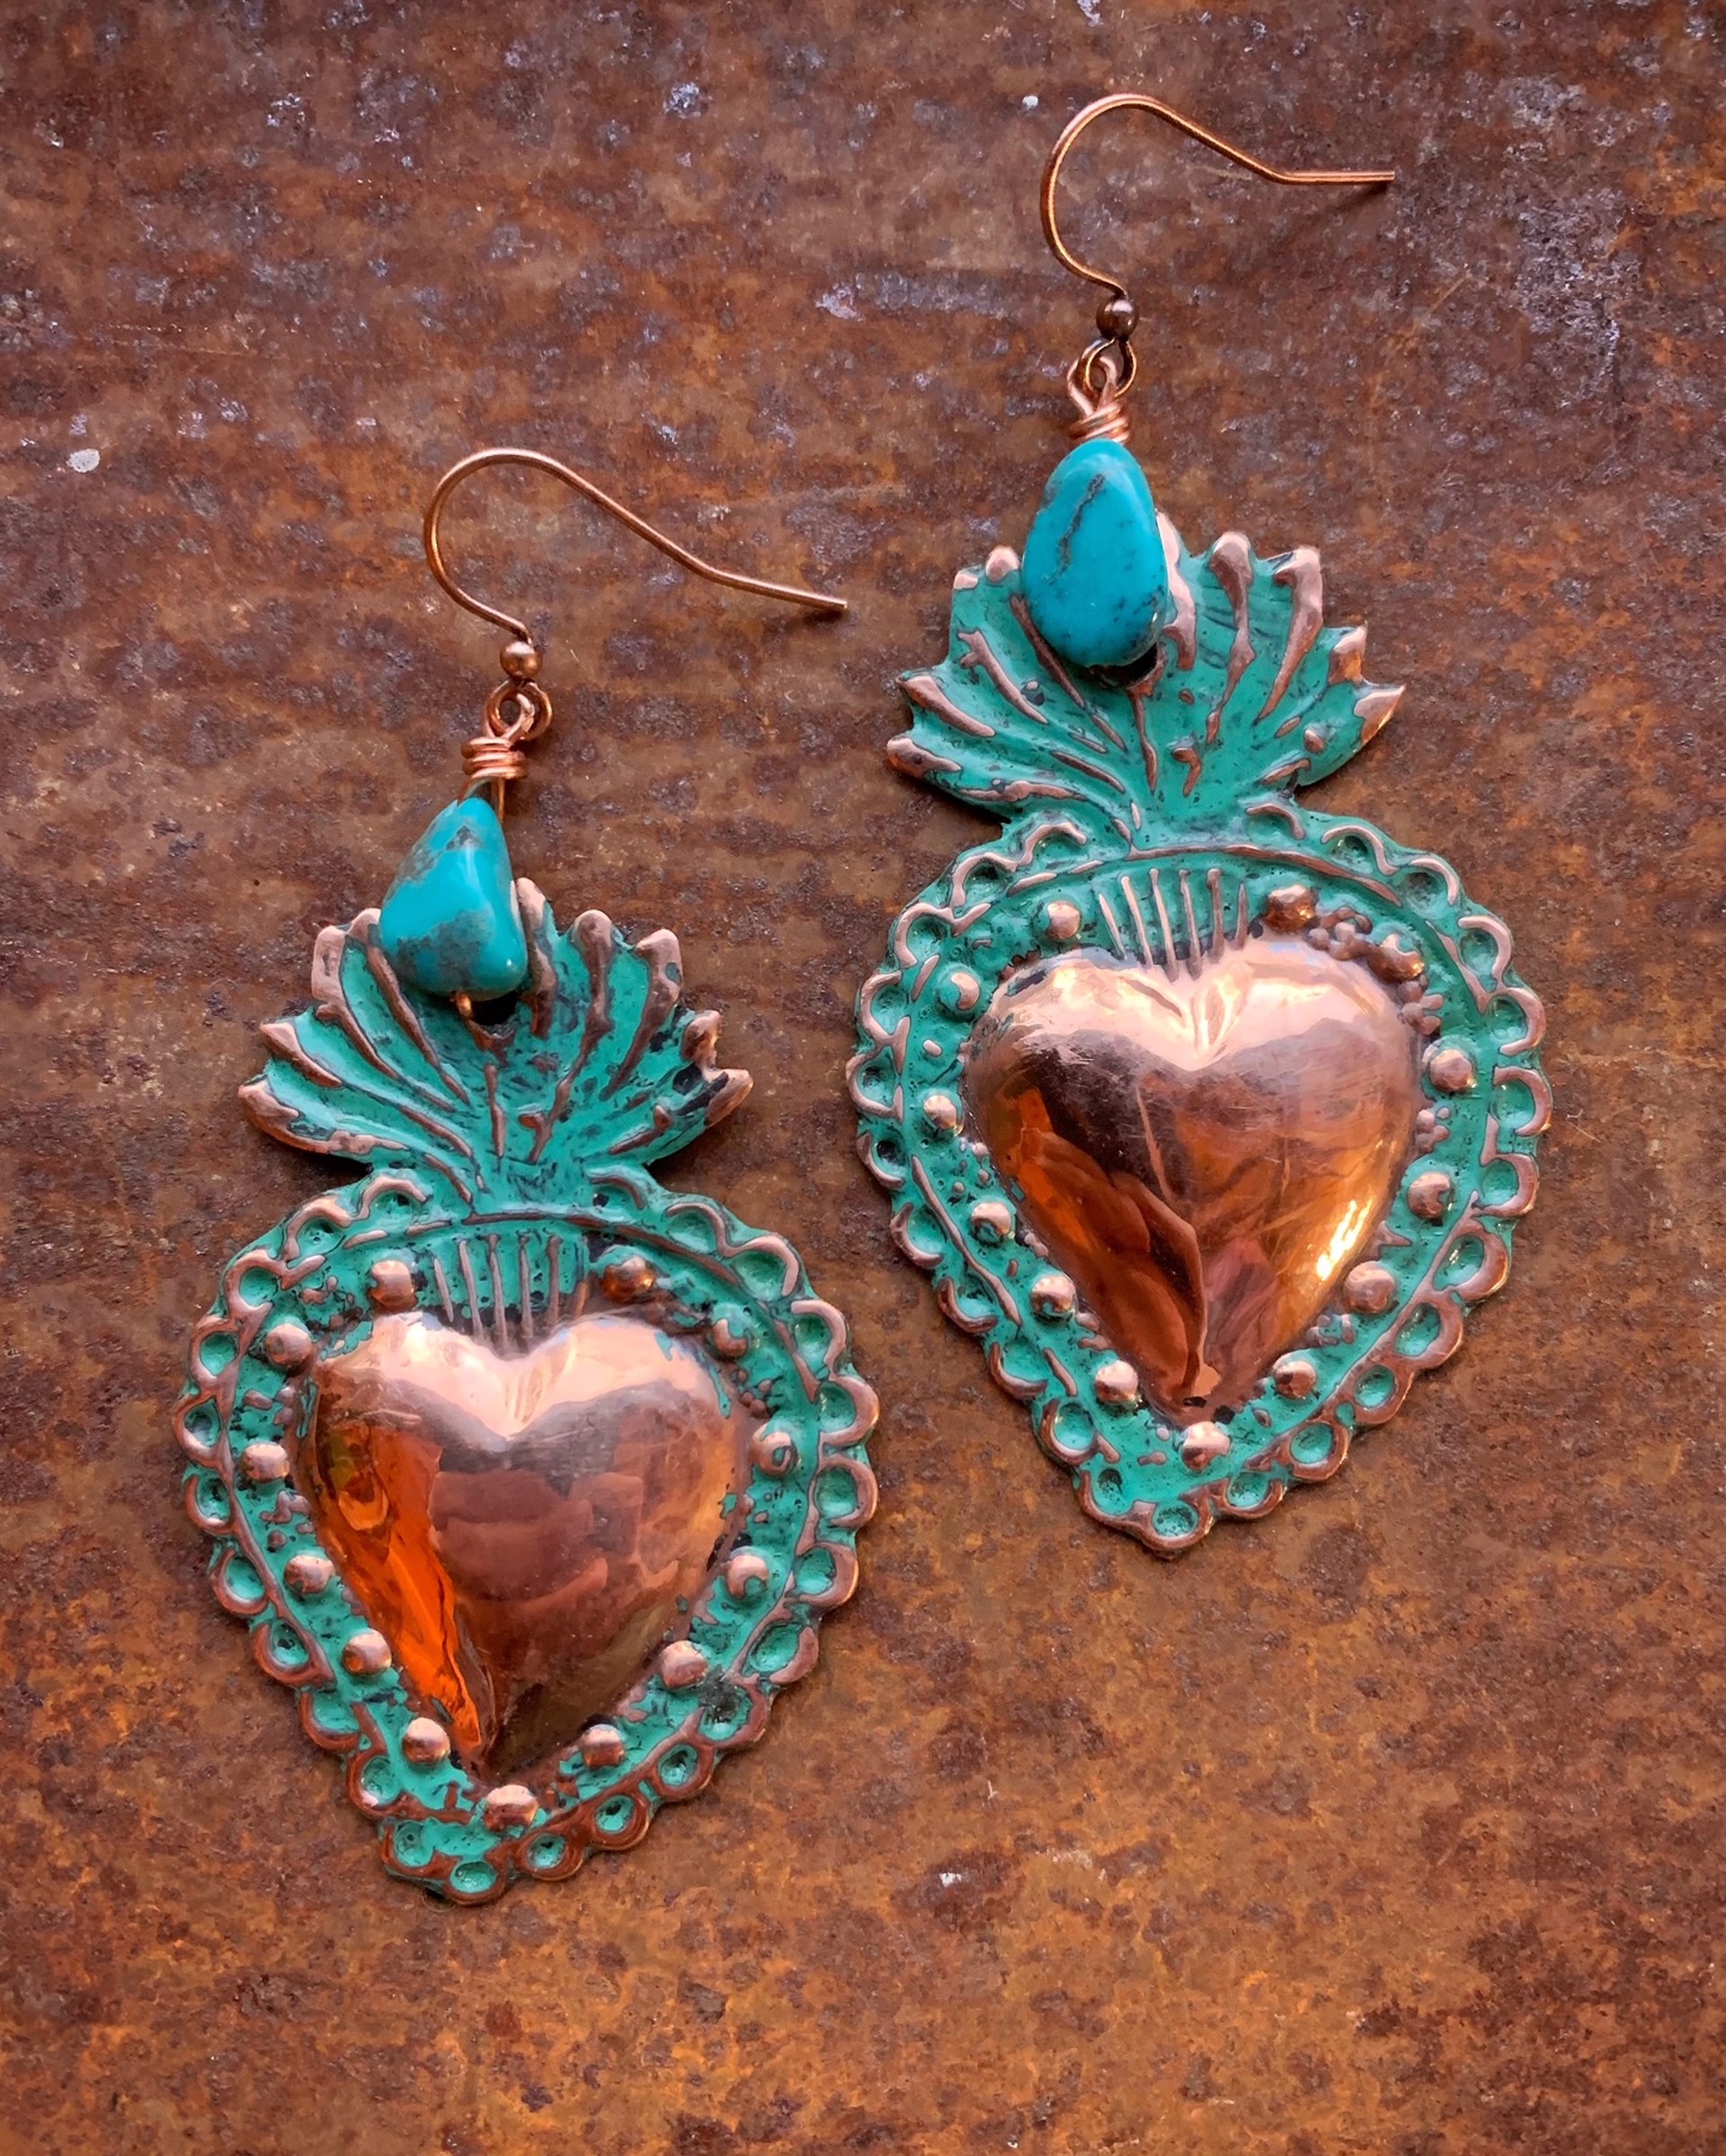 K800 Sacred Heart Earrings with Turquoise by Kelly Ormsby